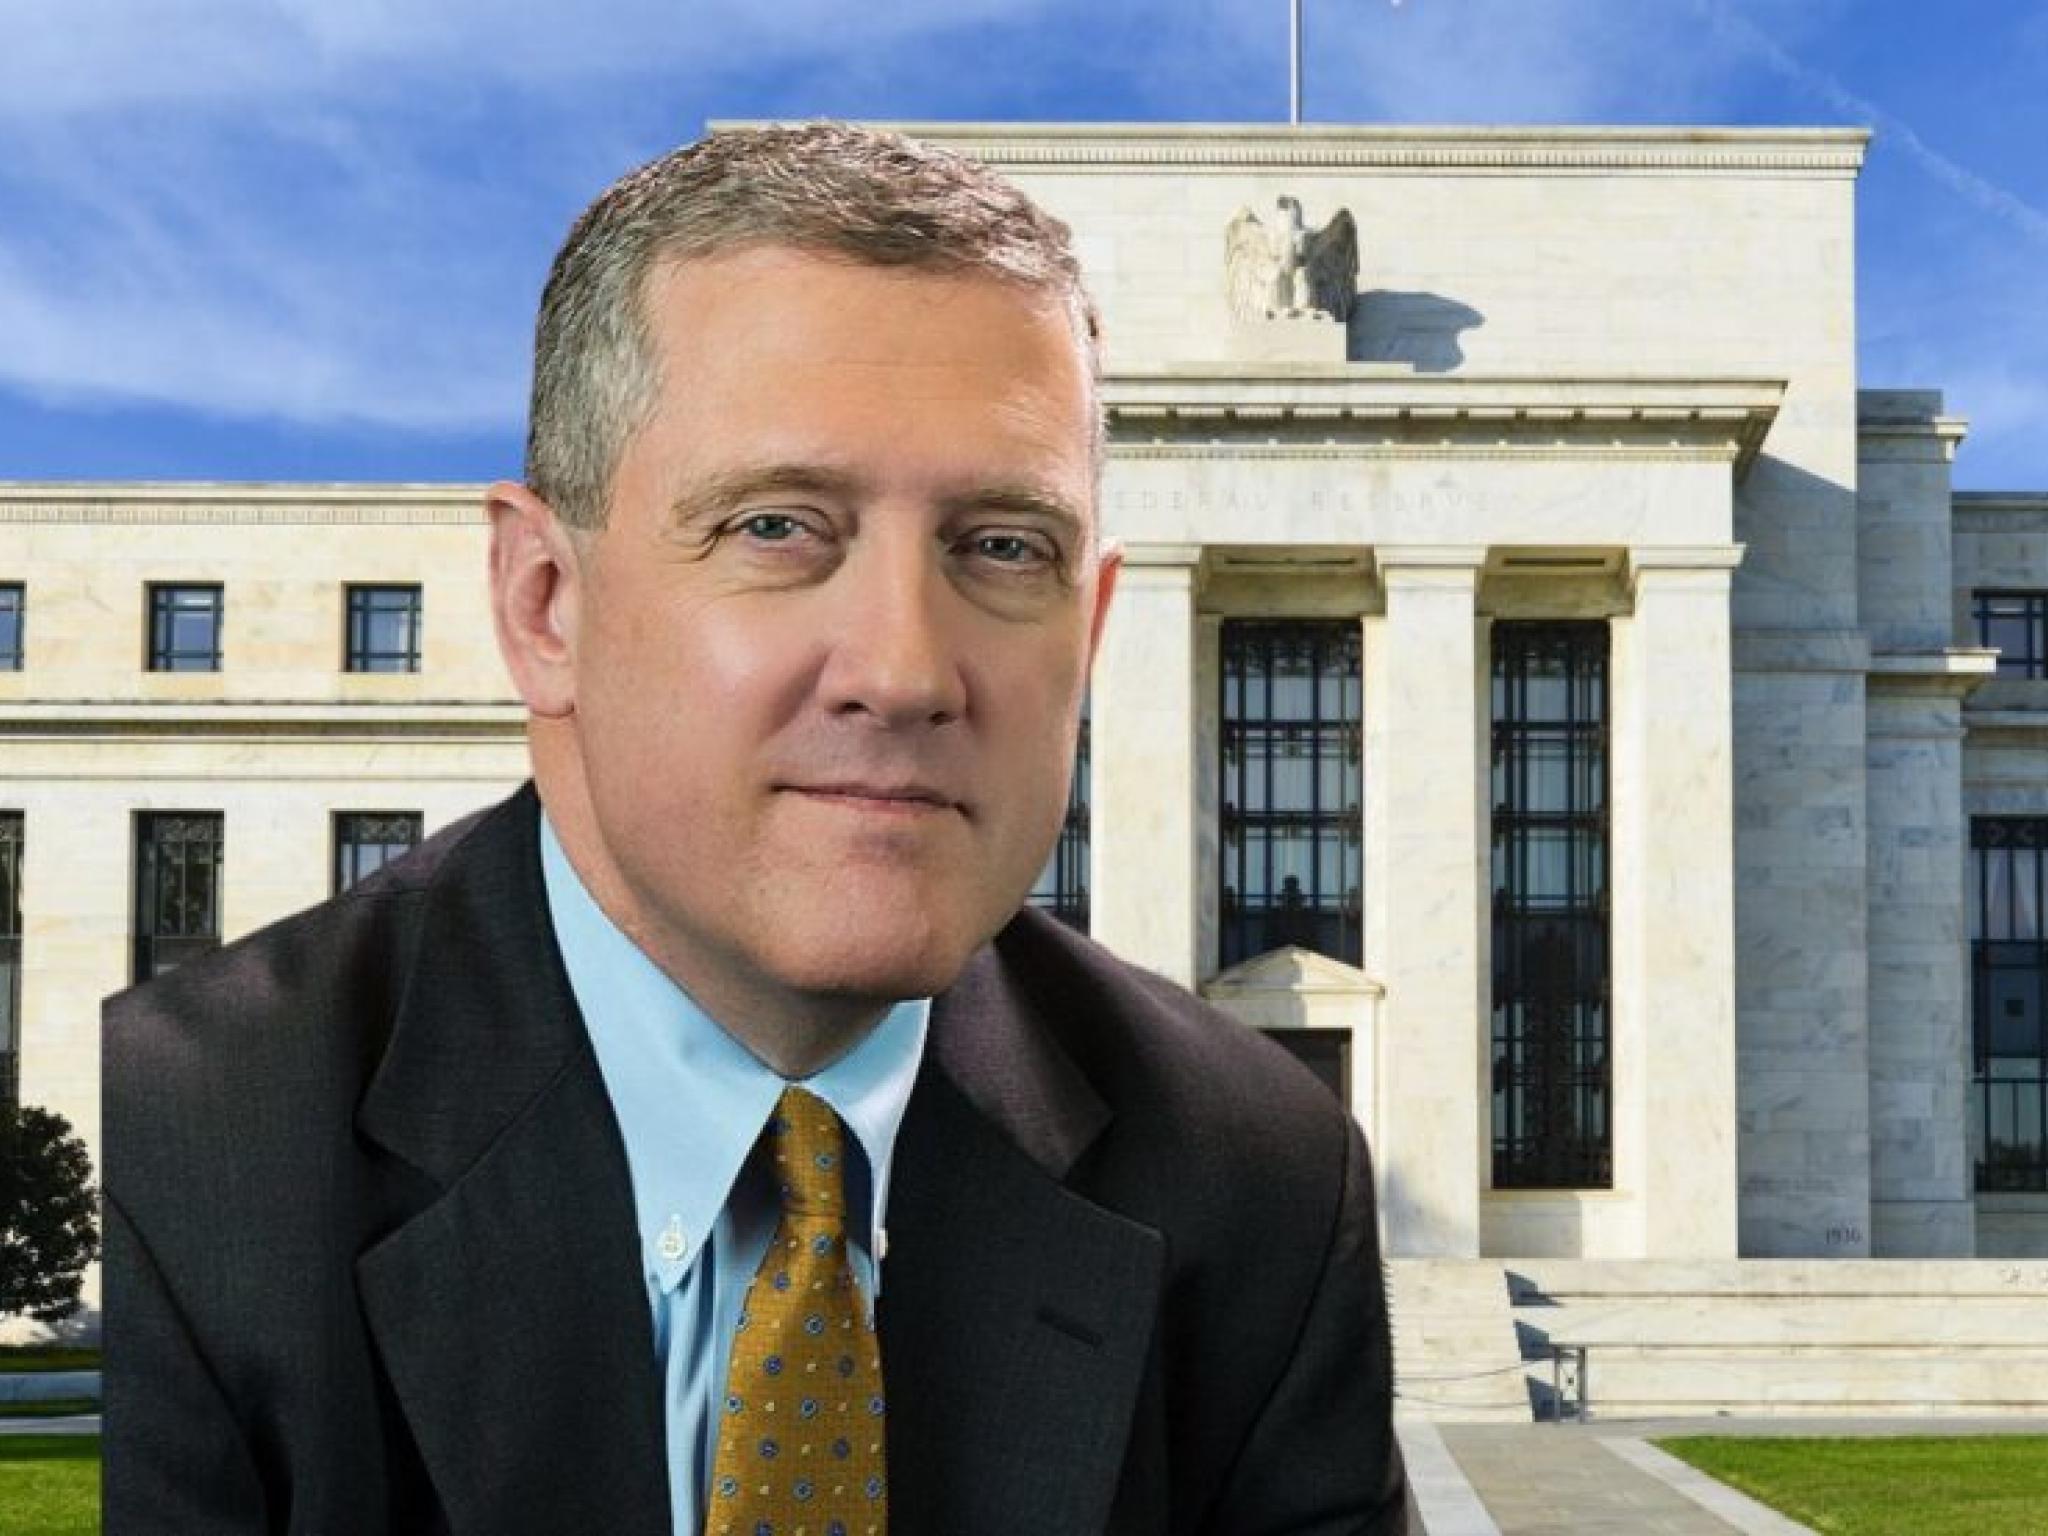  former-fed-president-bullard-dismisses-recession-alarms-foresees-possible-rate-hikes 